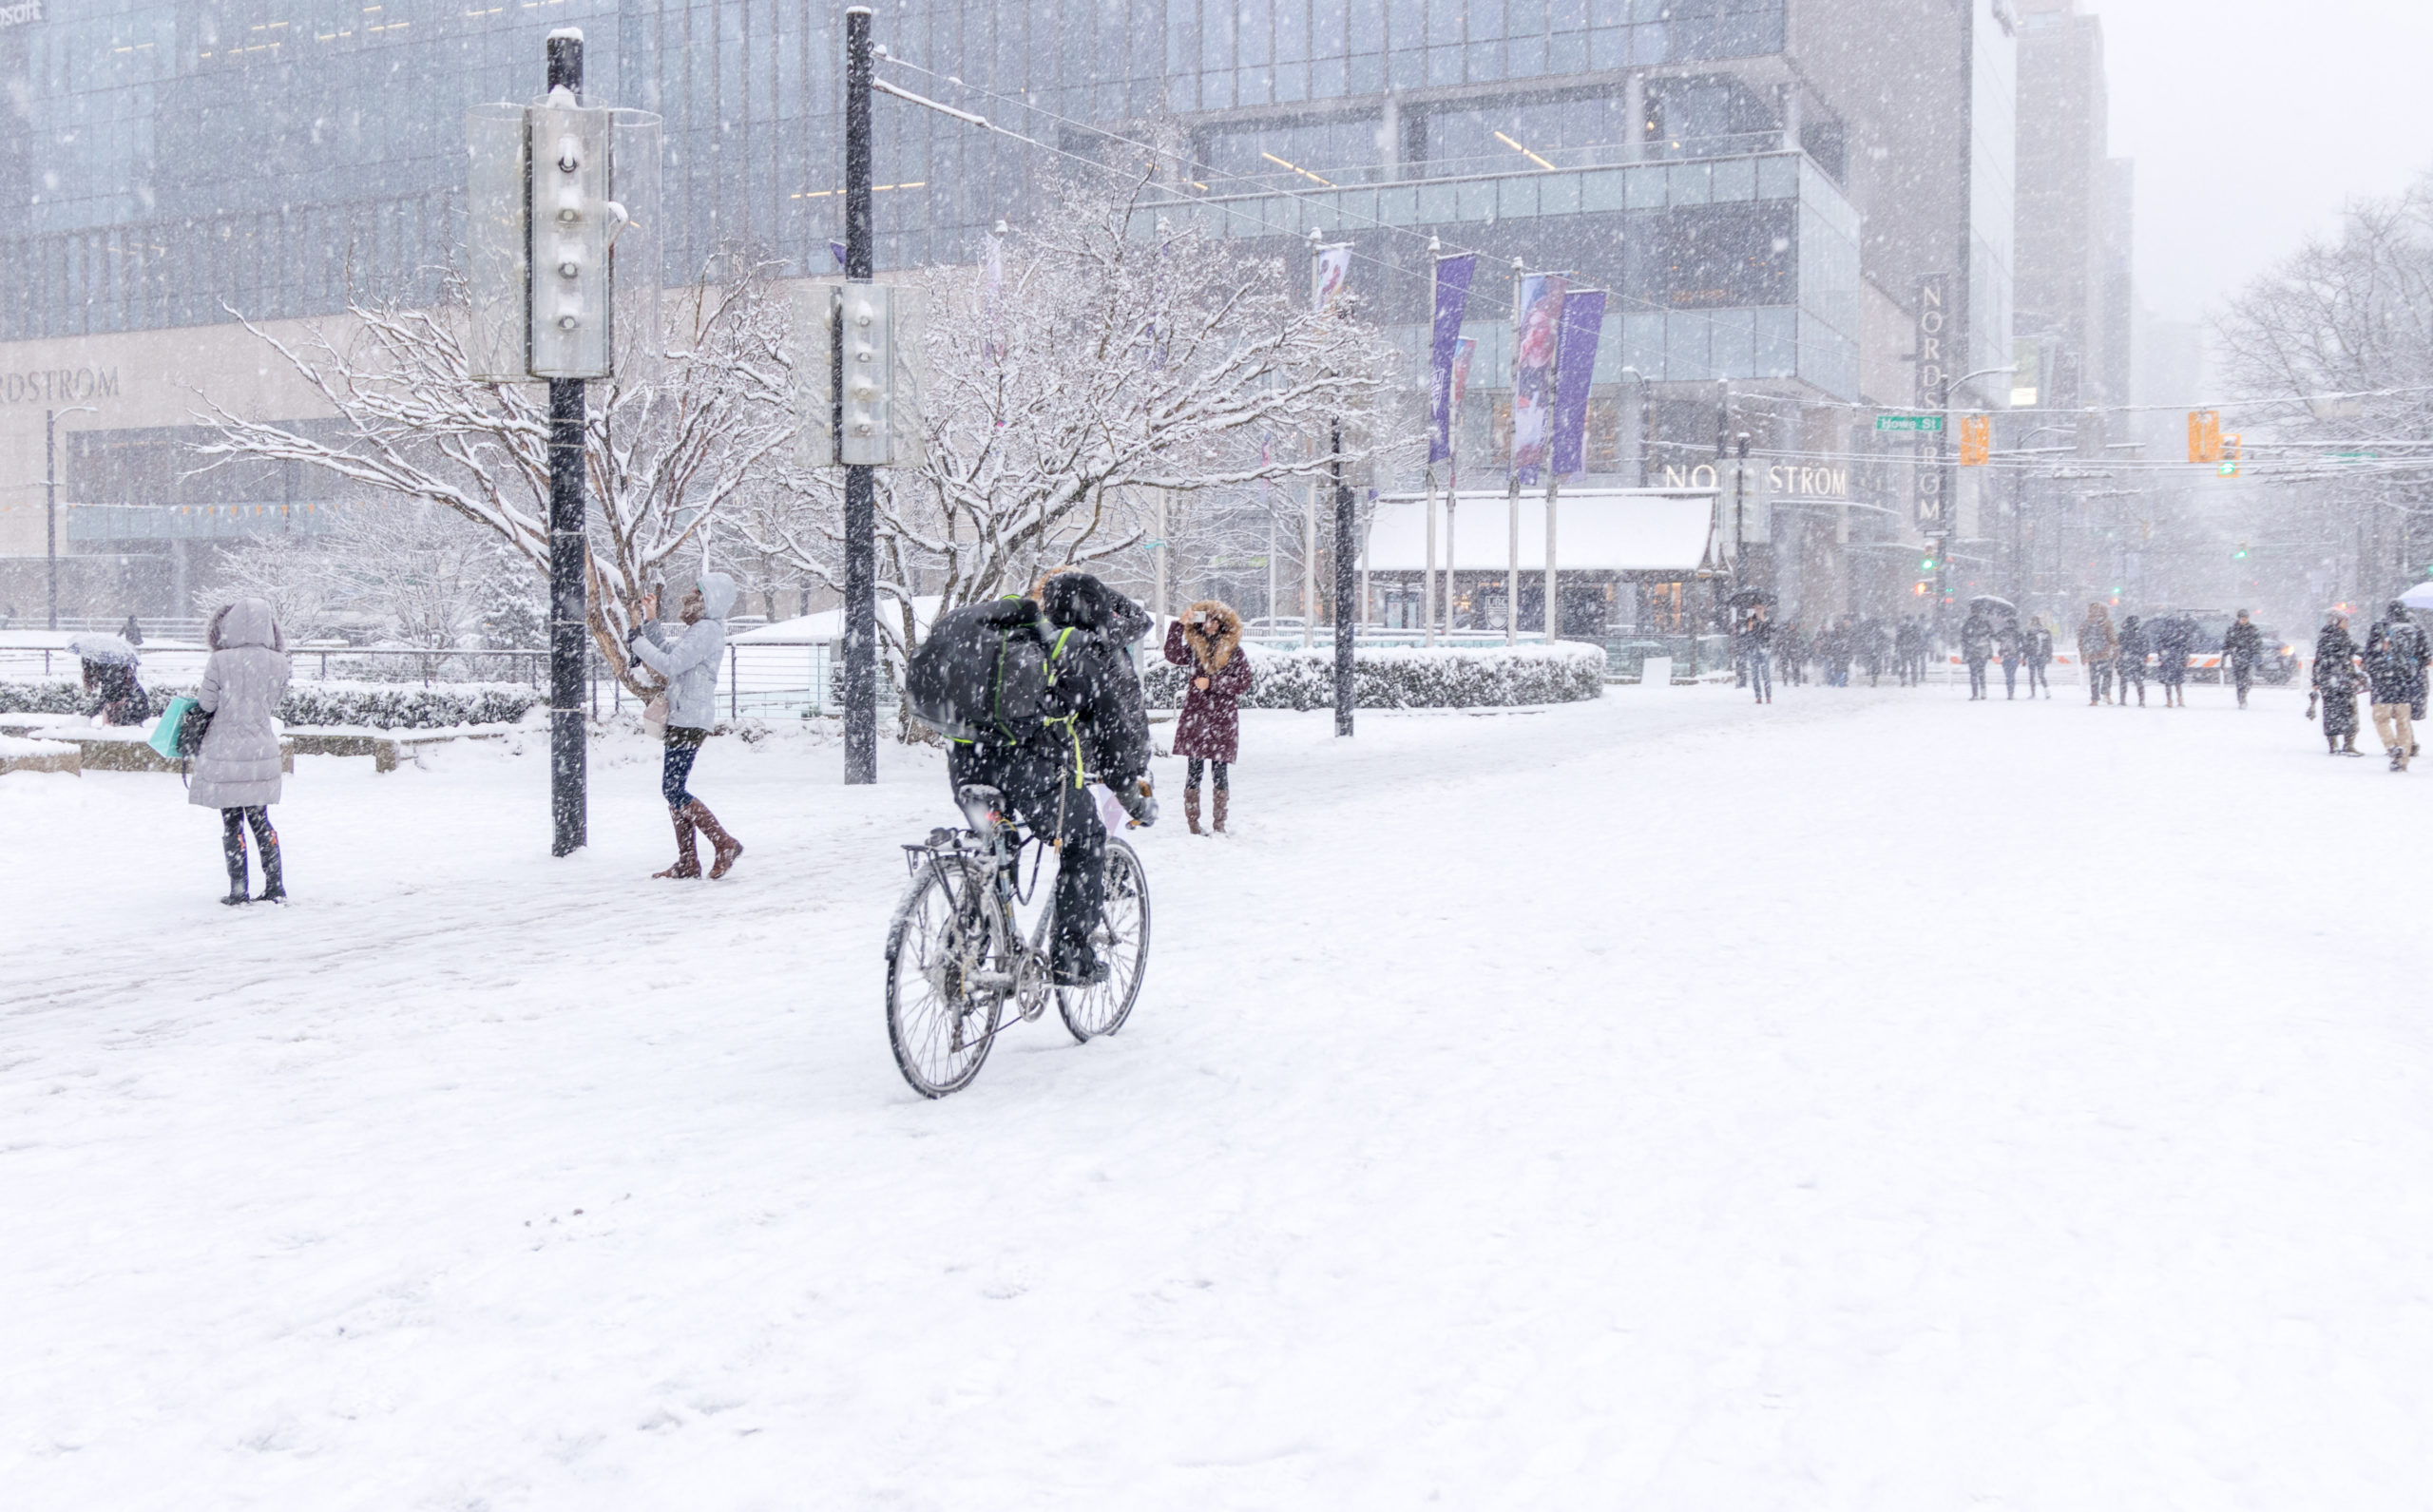 More Snow on the way for Metro Vancouver area